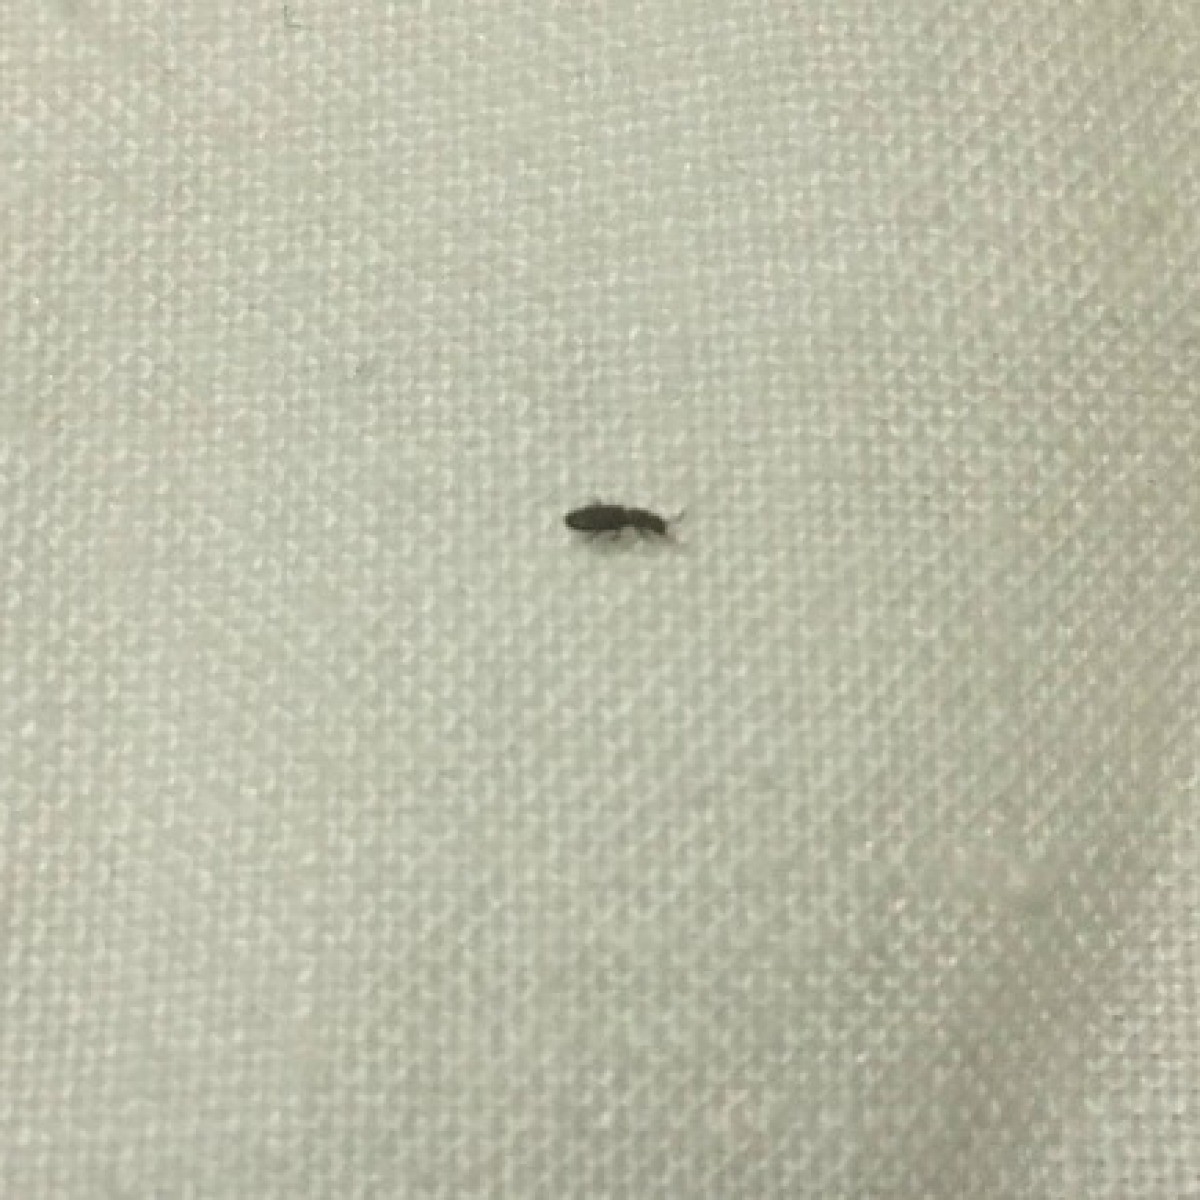 Identifying Tiny Flying Black Insects Thriftyfun - Vrogue